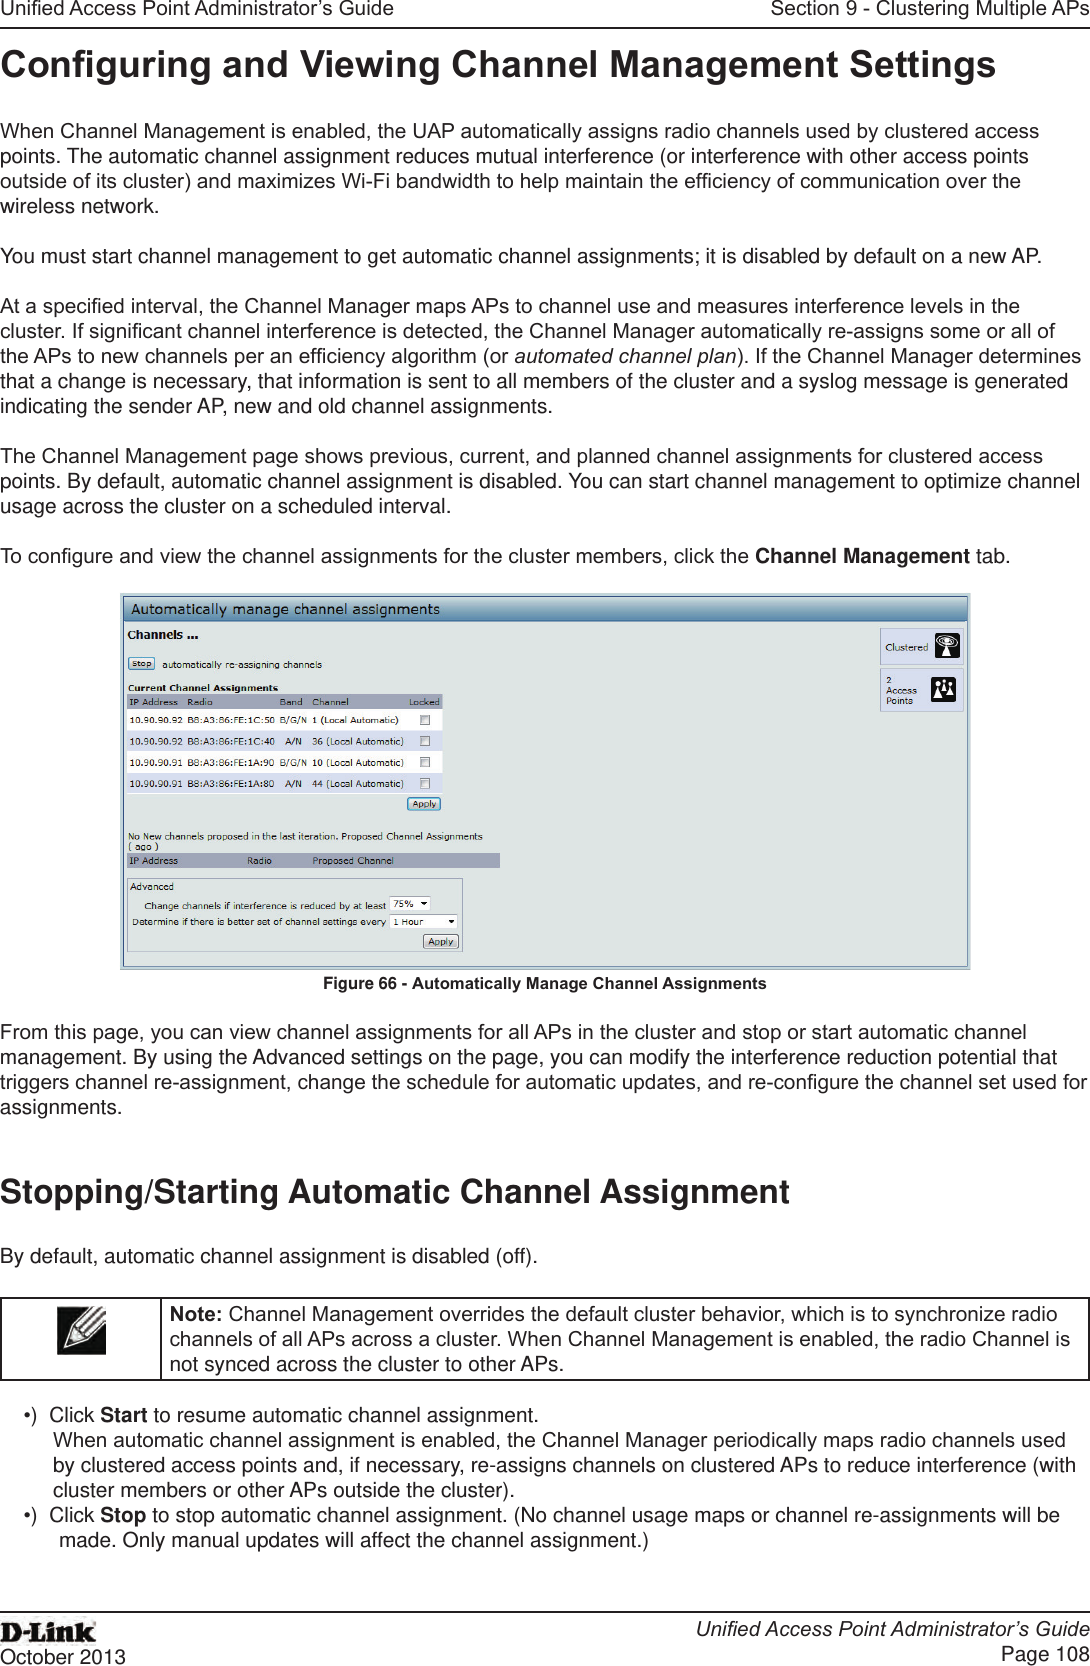 Unied Access Point Administrator’s GuideUnied Access Point Administrator’s GuidePage 108October 2013Section 9 - Clustering Multiple APsConguring and Viewing Channel Management SettingsWhen Channel Management is enabled, the UAP automatically assigns radio channels used by clustered access points. The automatic channel assignment reduces mutual interference (or interference with other access points outside of its cluster) and maximizes Wi-Fi bandwidth to help maintain the efciency of communication over the wireless network.You must start channel management to get automatic channel assignments; it is disabled by default on a new AP.At a specied interval, the Channel Manager maps APs to channel use and measures interference levels in the cluster. If signicant channel interference is detected, the Channel Manager automatically re-assigns some or all of the APs to new channels per an efciency algorithm (or automated channel plan). If the Channel Manager determines that a change is necessary, that information is sent to all members of the cluster and a syslog message is generated indicating the sender AP, new and old channel assignments.The Channel Management page shows previous, current, and planned channel assignments for clustered access points. By default, automatic channel assignment is disabled. You can start channel management to optimize channel usage across the cluster on a scheduled interval.To congure and view the channel assignments for the cluster members, click the Channel Management tab.Figure 66 - Automatically Manage Channel AssignmentsFrom this page, you can view channel assignments for all APs in the cluster and stop or start automatic channel management. By using the Advanced settings on the page, you can modify the interference reduction potential that triggers channel re-assignment, change the schedule for automatic updates, and re-congure the channel set used for assignments.Stopping/Starting Automatic Channel AssignmentBy default, automatic channel assignment is disabled (off).Note: Channel Management overrides the default cluster behavior, which is to synchronize radio channels of all APs across a cluster. When Channel Management is enabled, the radio Channel is not synced across the cluster to other APs. •)  Click Start to resume automatic channel assignment.When automatic channel assignment is enabled, the Channel Manager periodically maps radio channels used by clustered access points and, if necessary, re-assigns channels on clustered APs to reduce interference (with cluster members or other APs outside the cluster).•)  Click Stop to stop automatic channel assignment. (No channel usage maps or channel re-assignments will be made. Only manual updates will affect the channel assignment.)